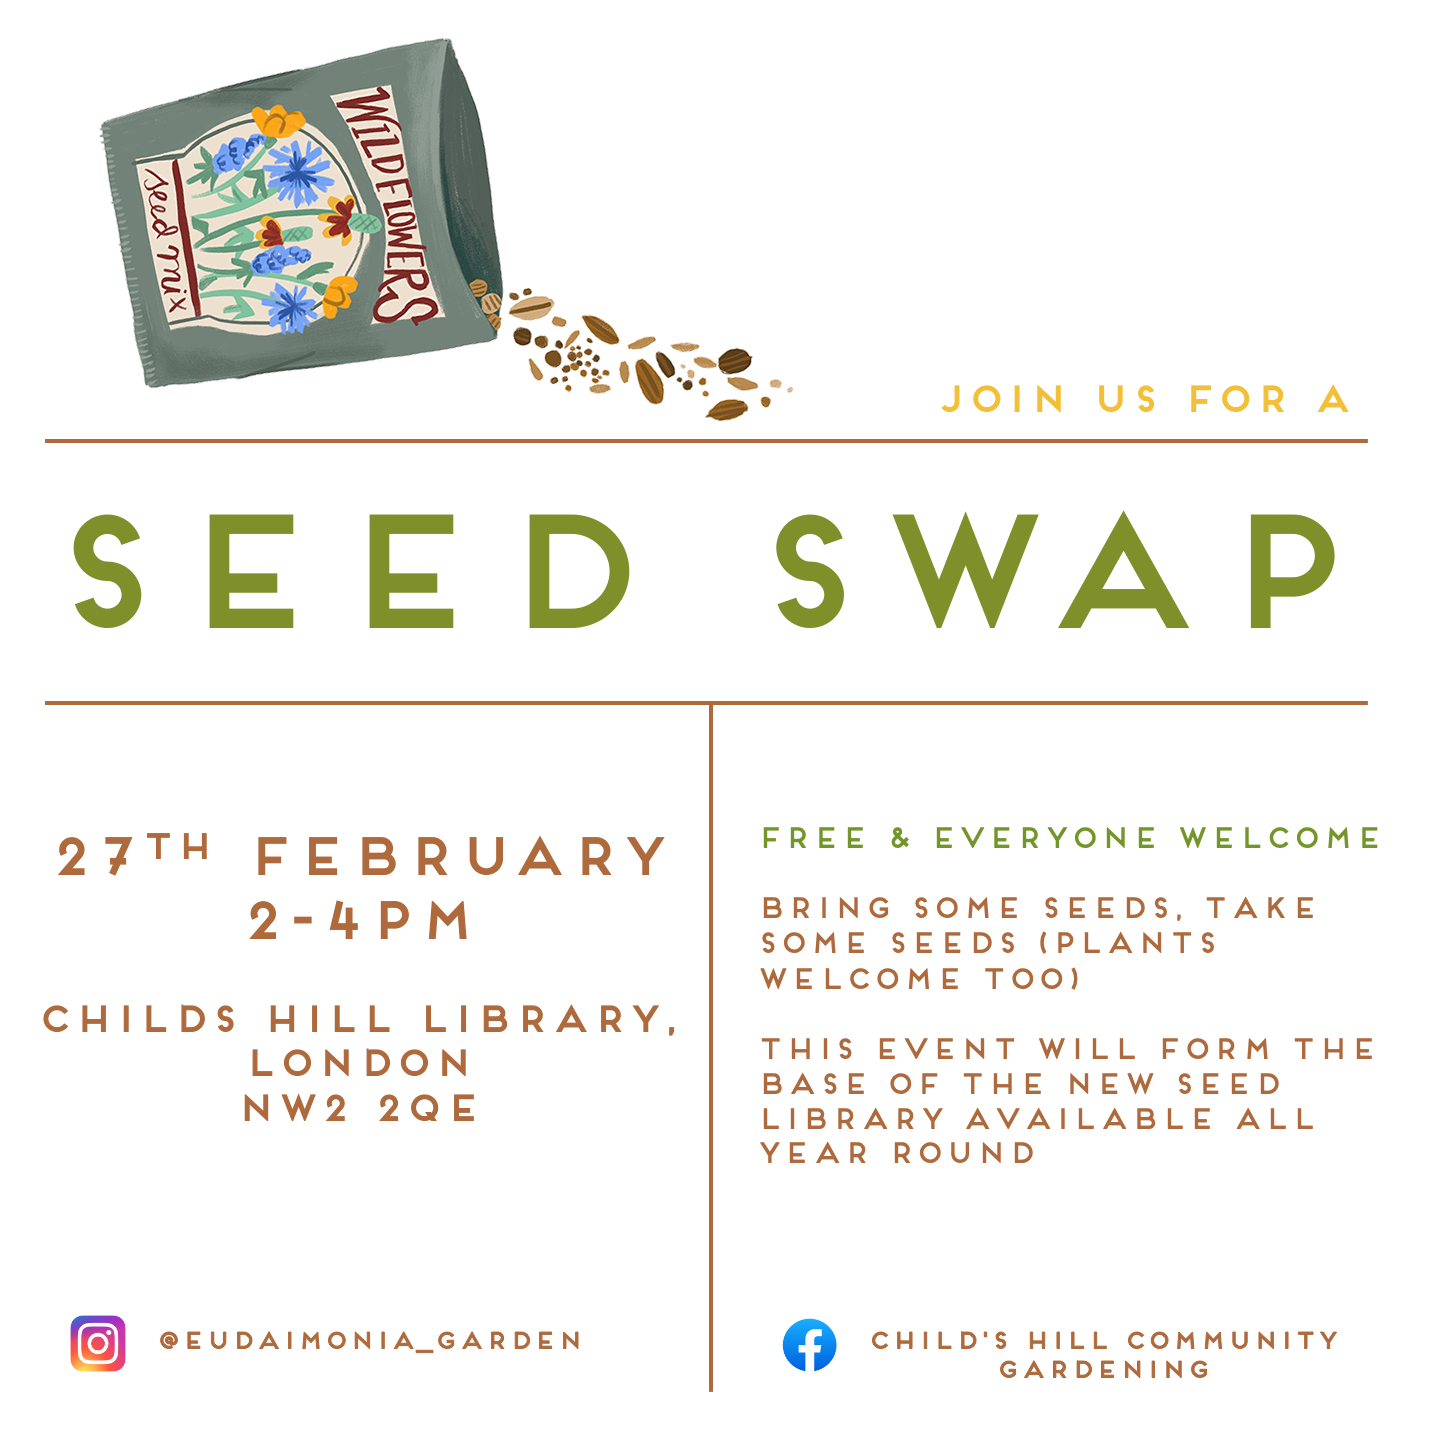 Seed Swap - Square format